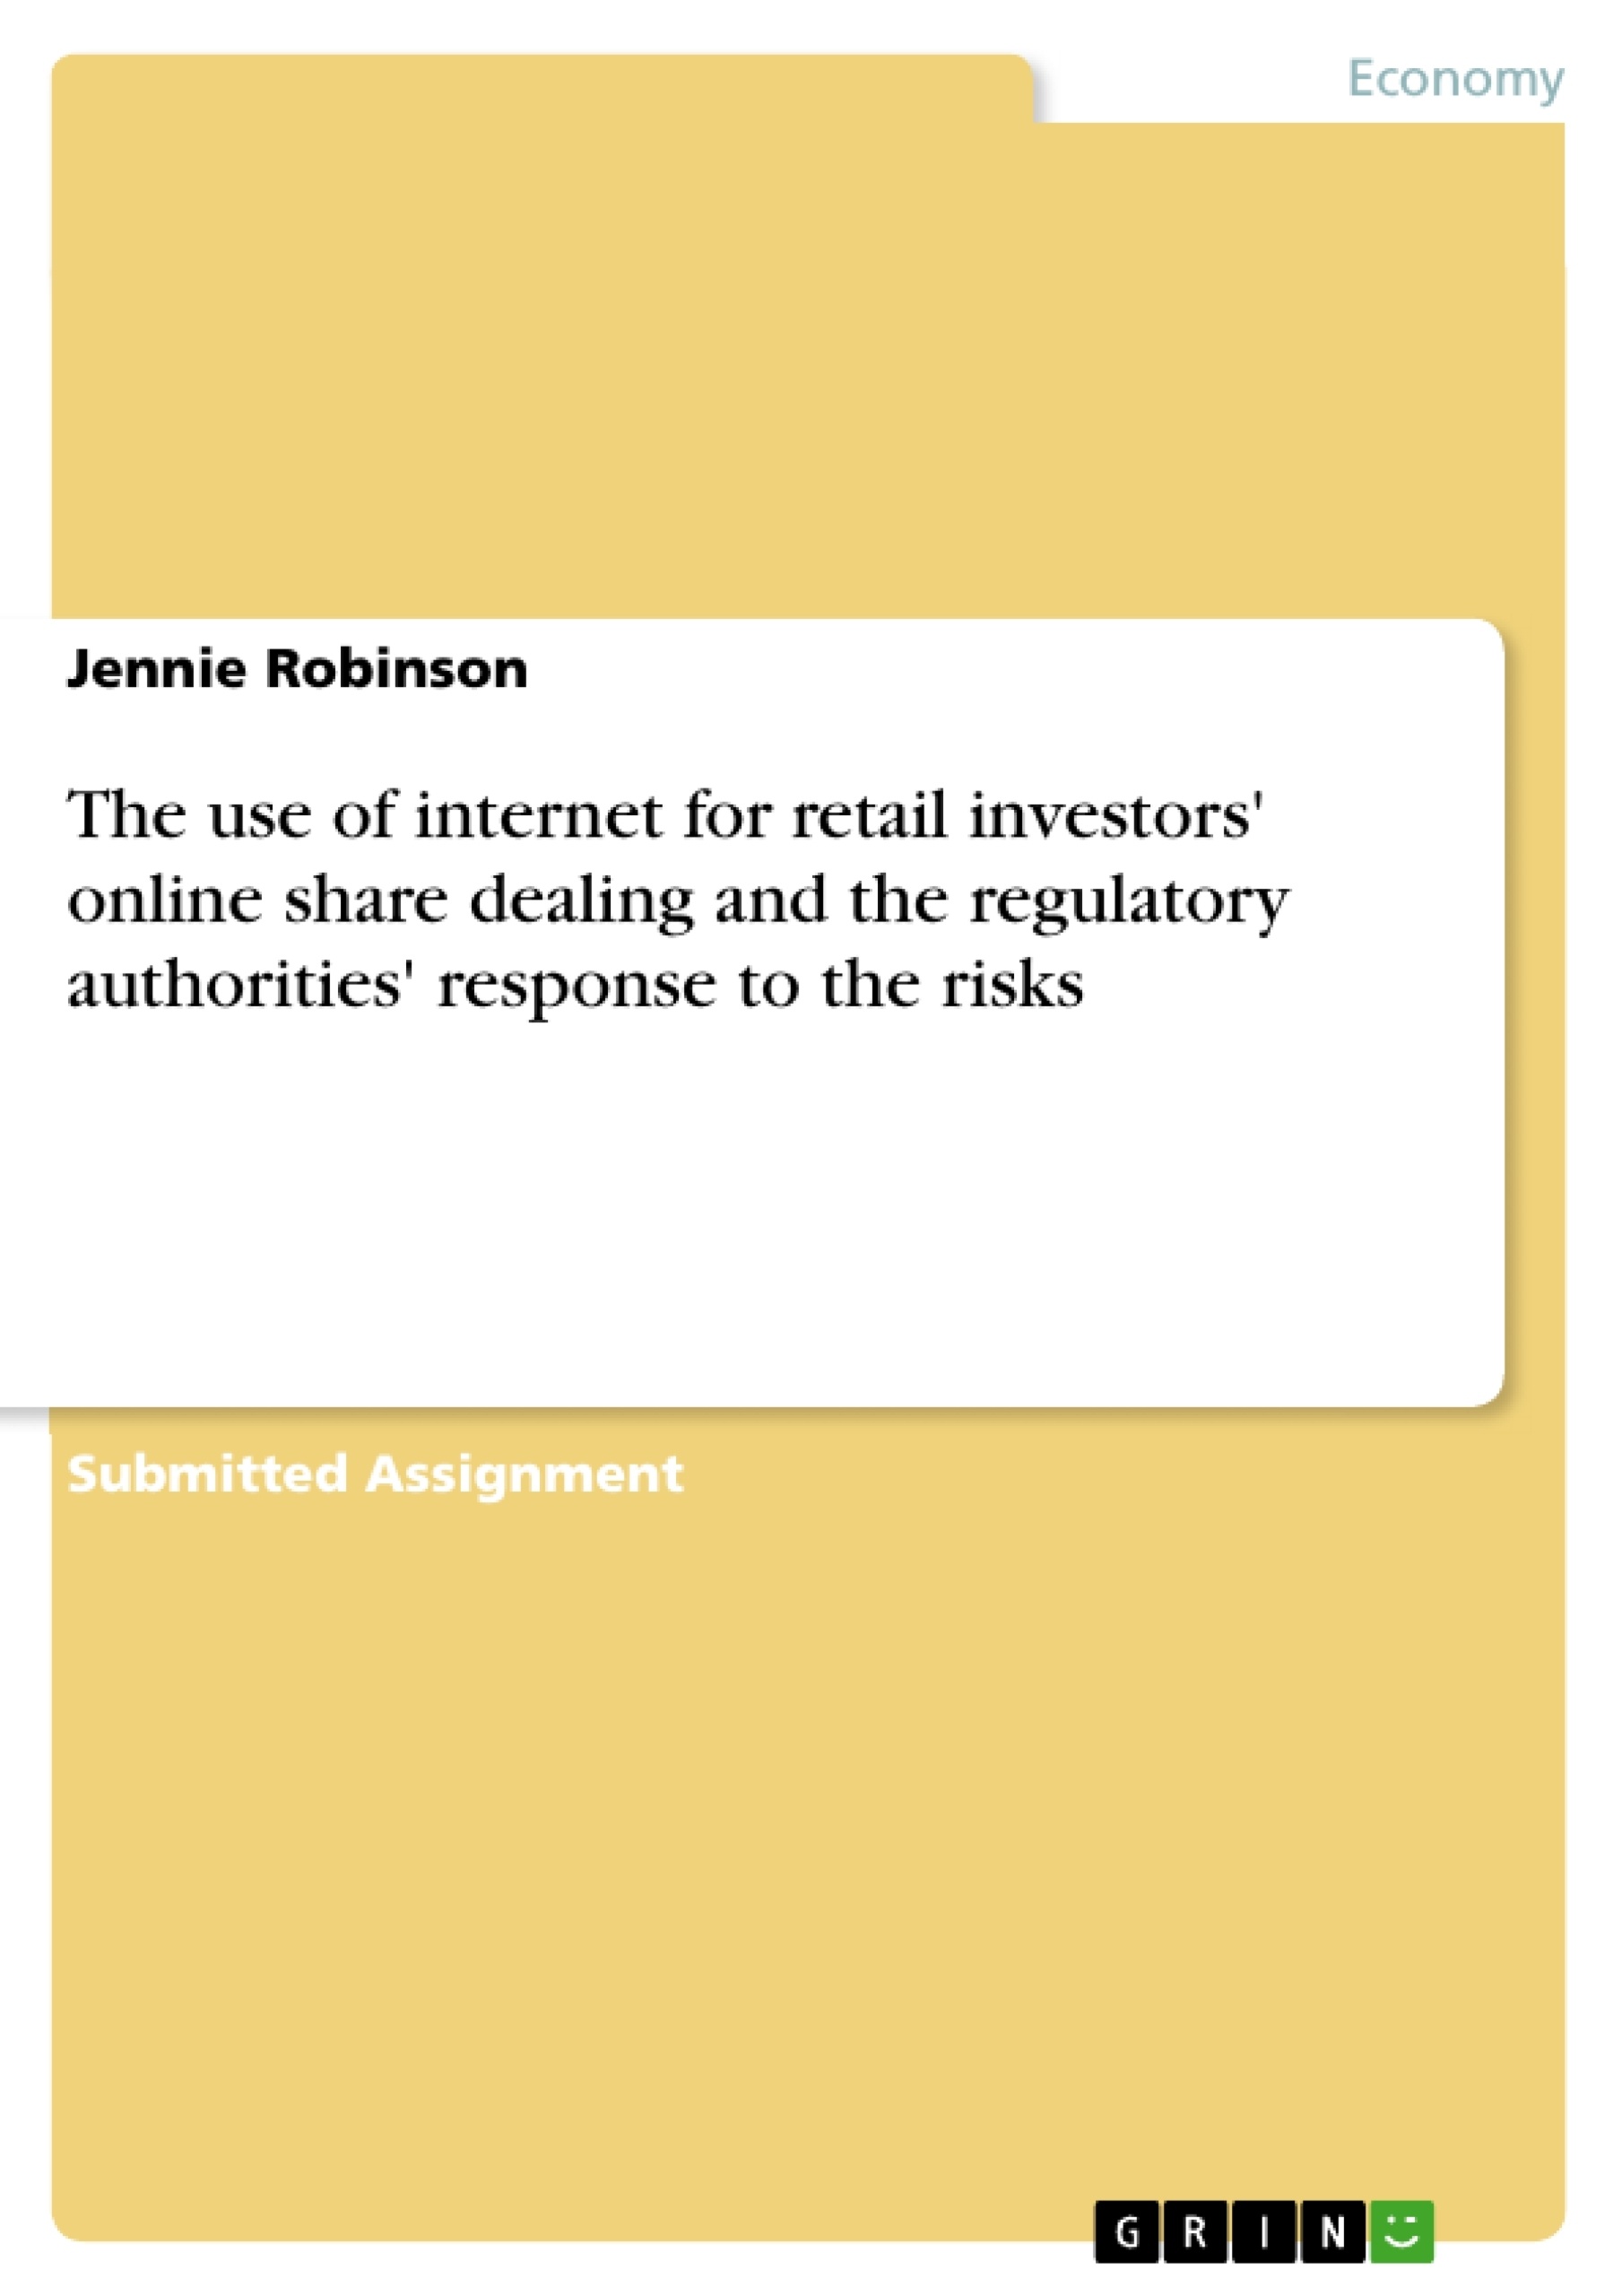 Título: The use of internet for retail investors' online share dealing and the regulatory authorities' response to the risks